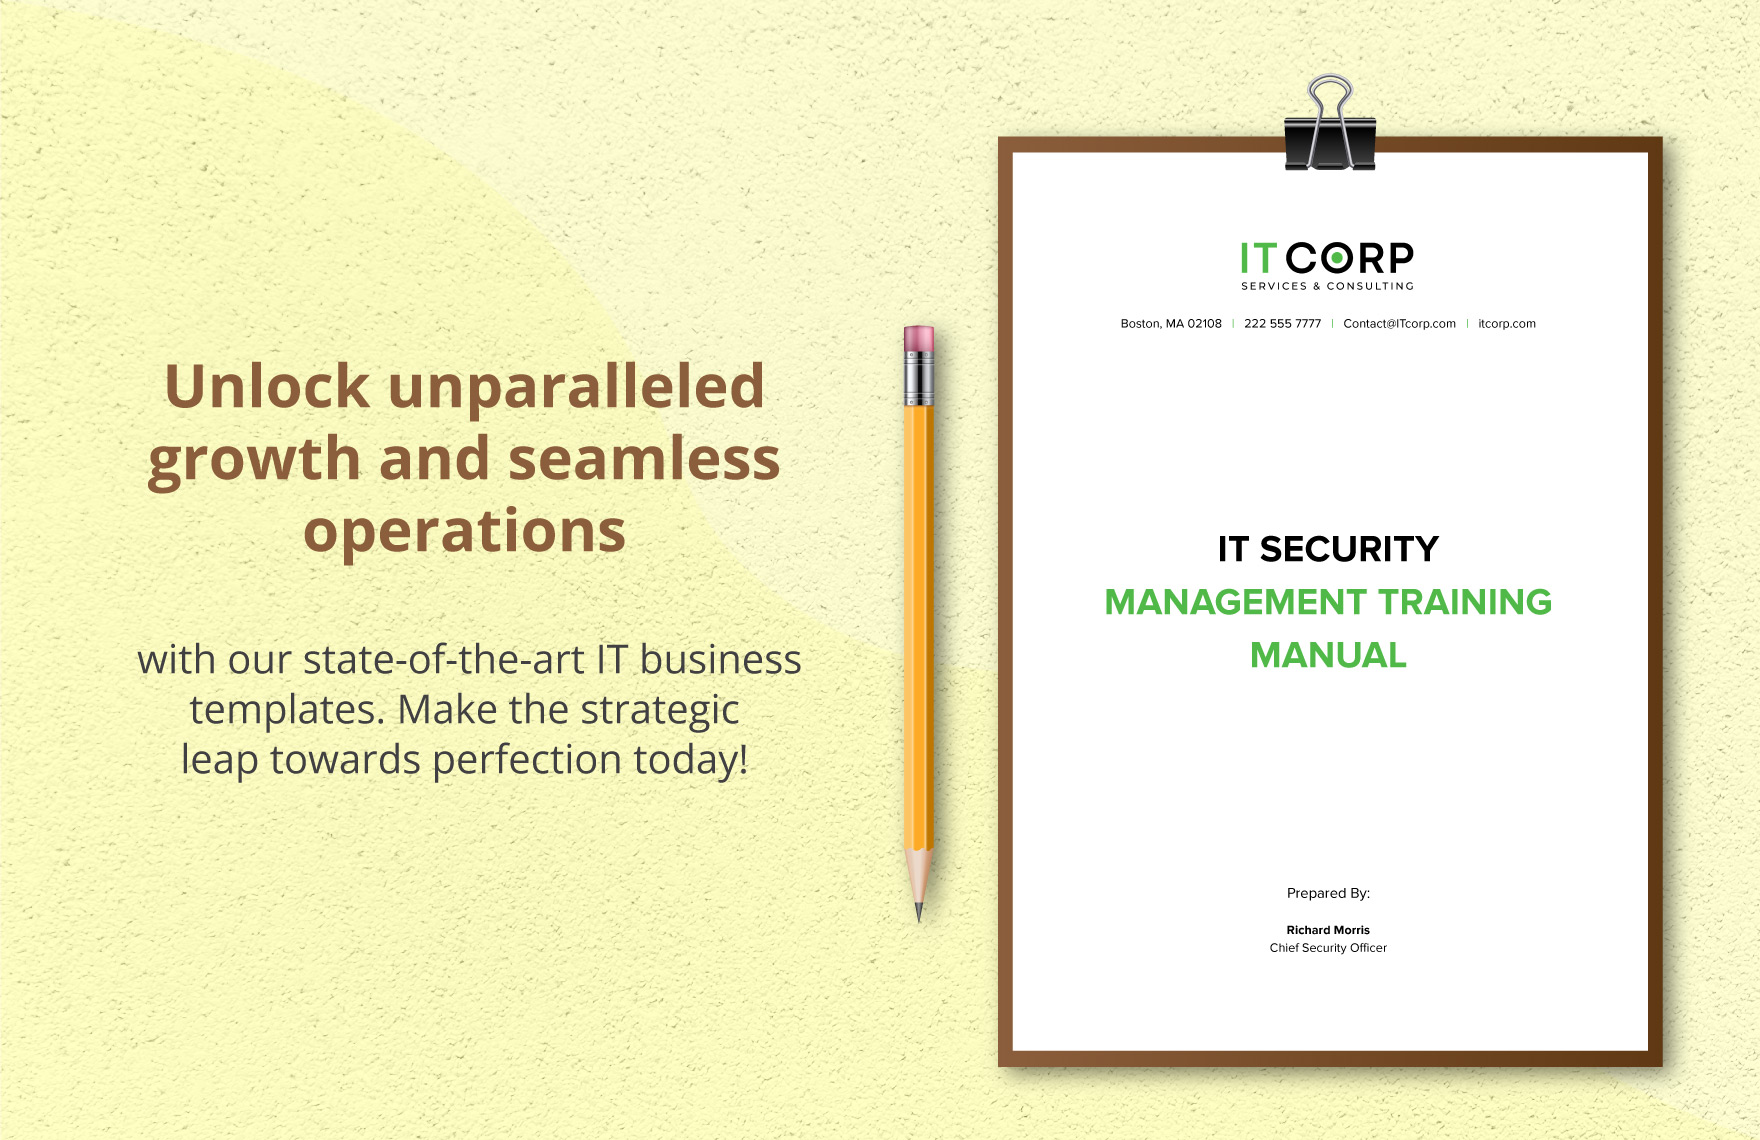 IT Security Management Training Manual Template